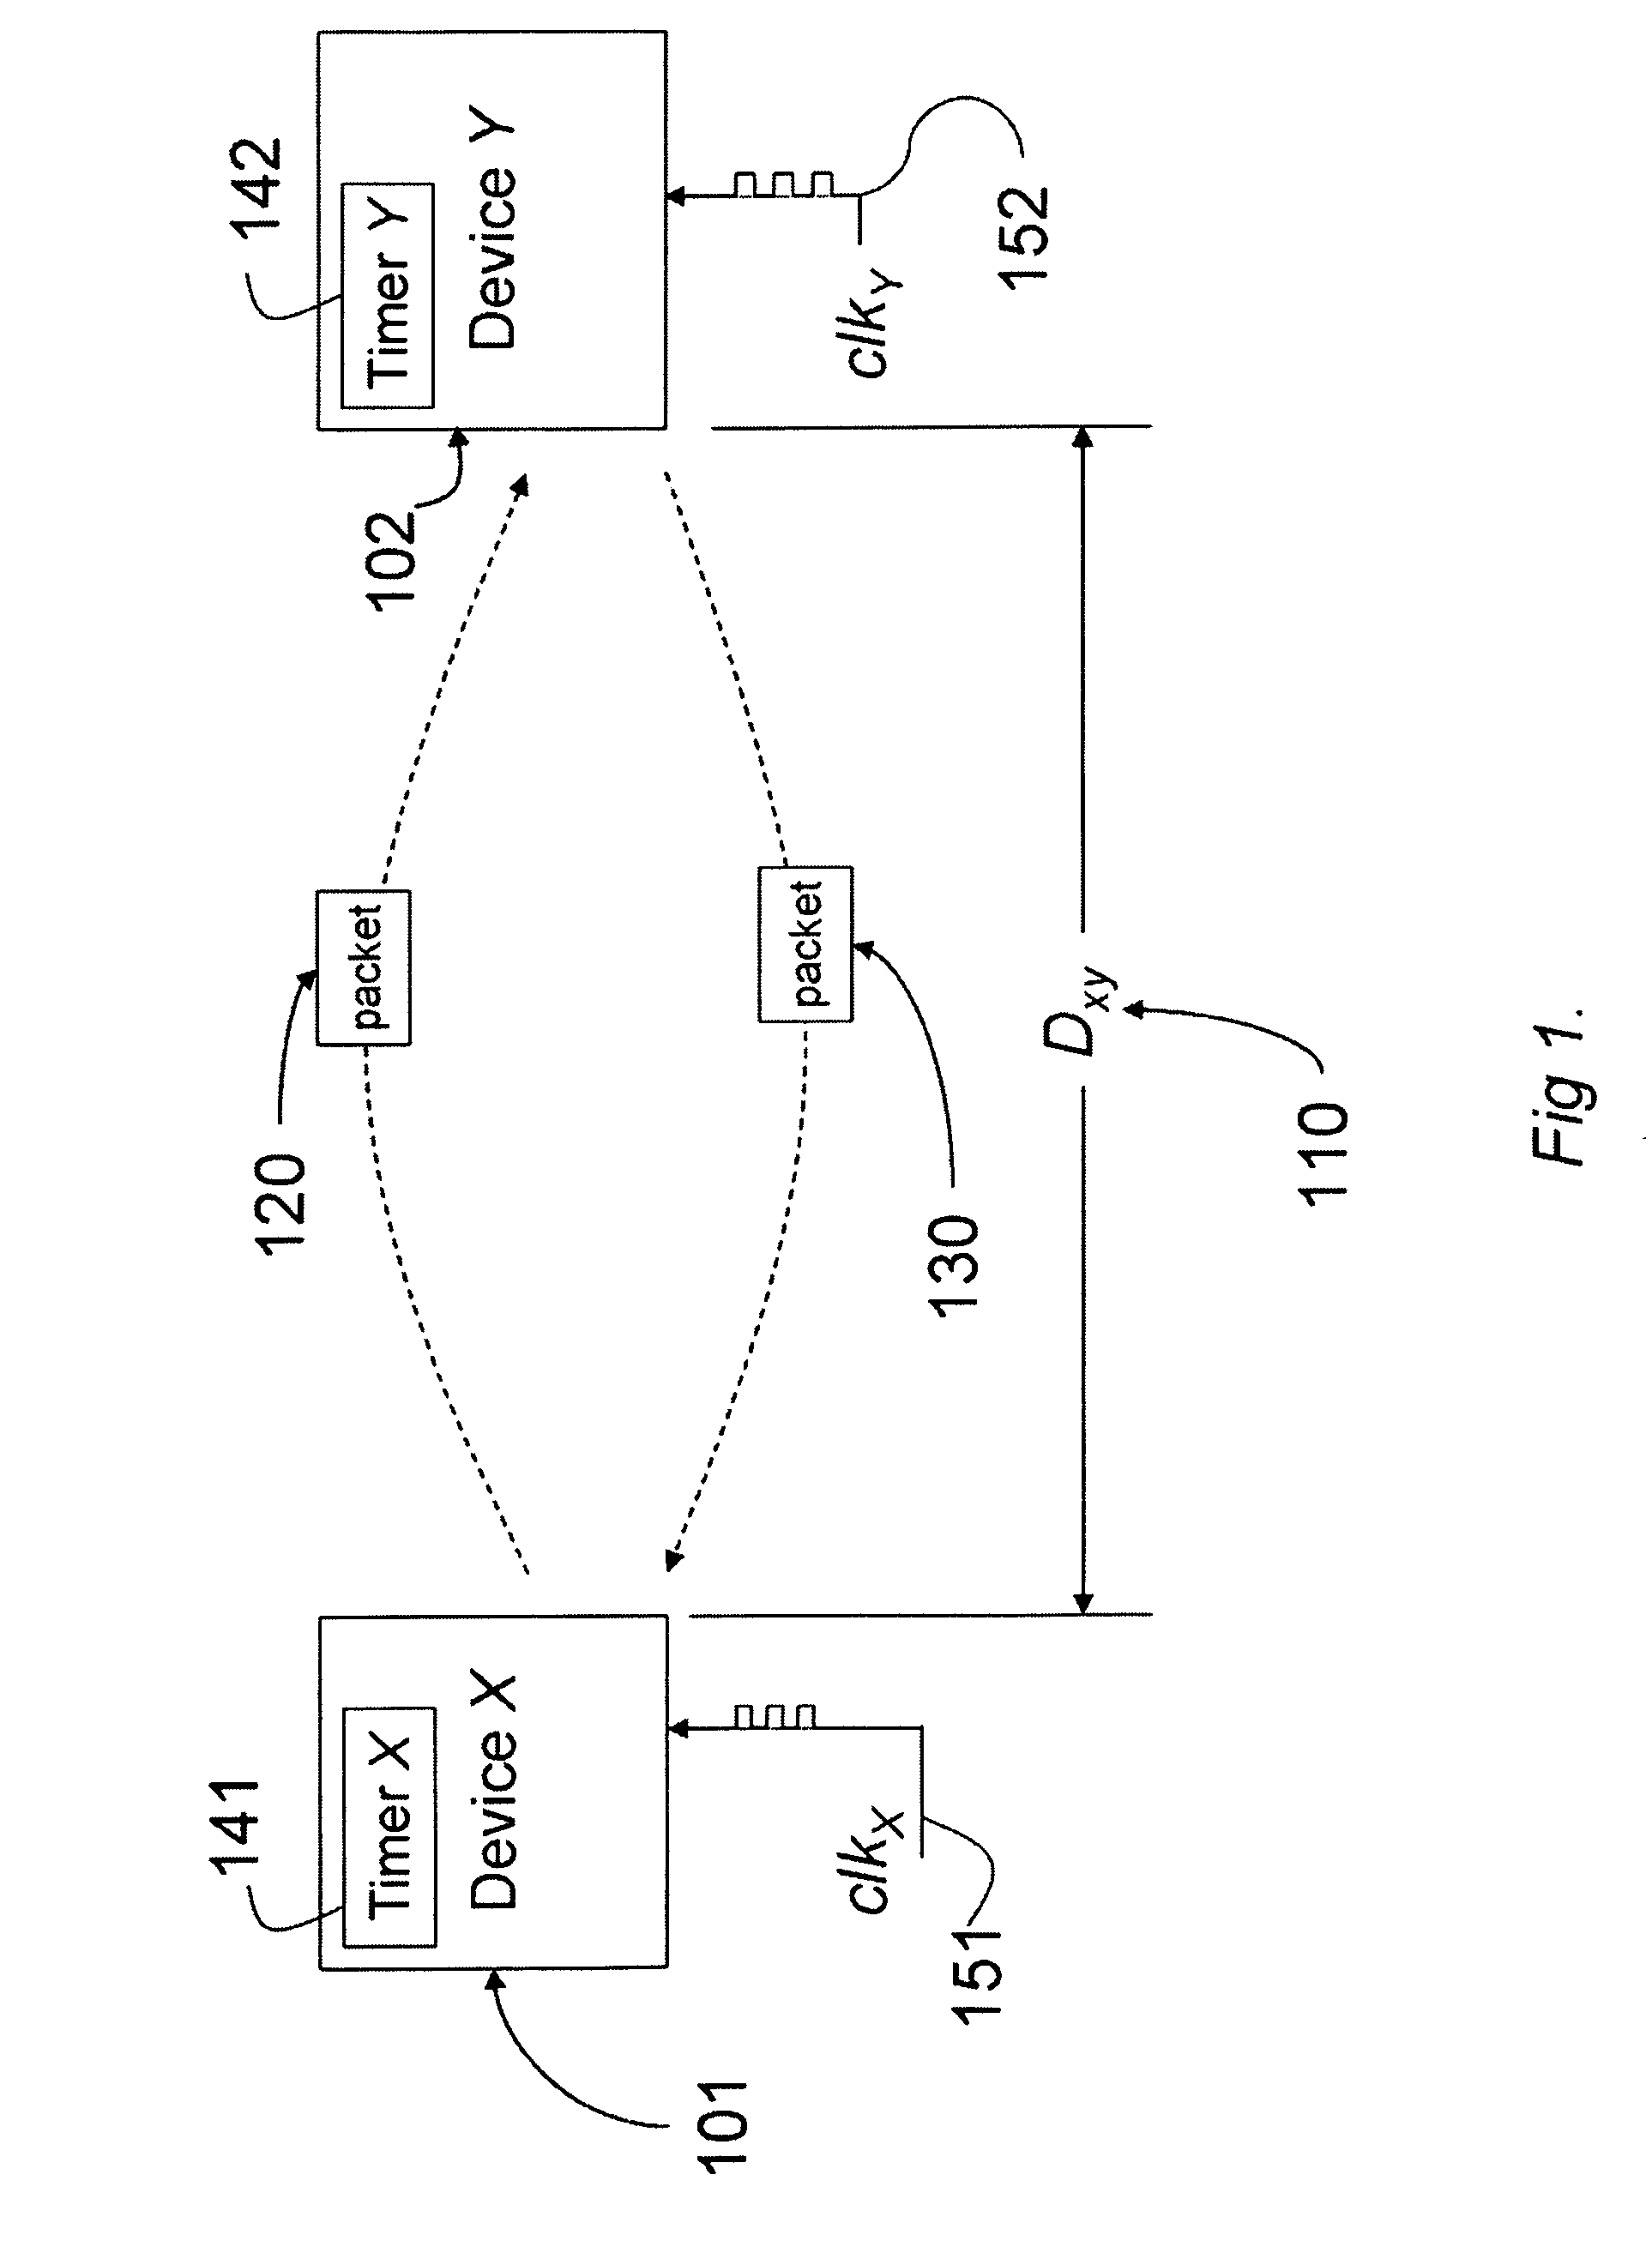 Method for Estimating Relative Clock Frequency Offsets to Improve Radio Ranging Errors